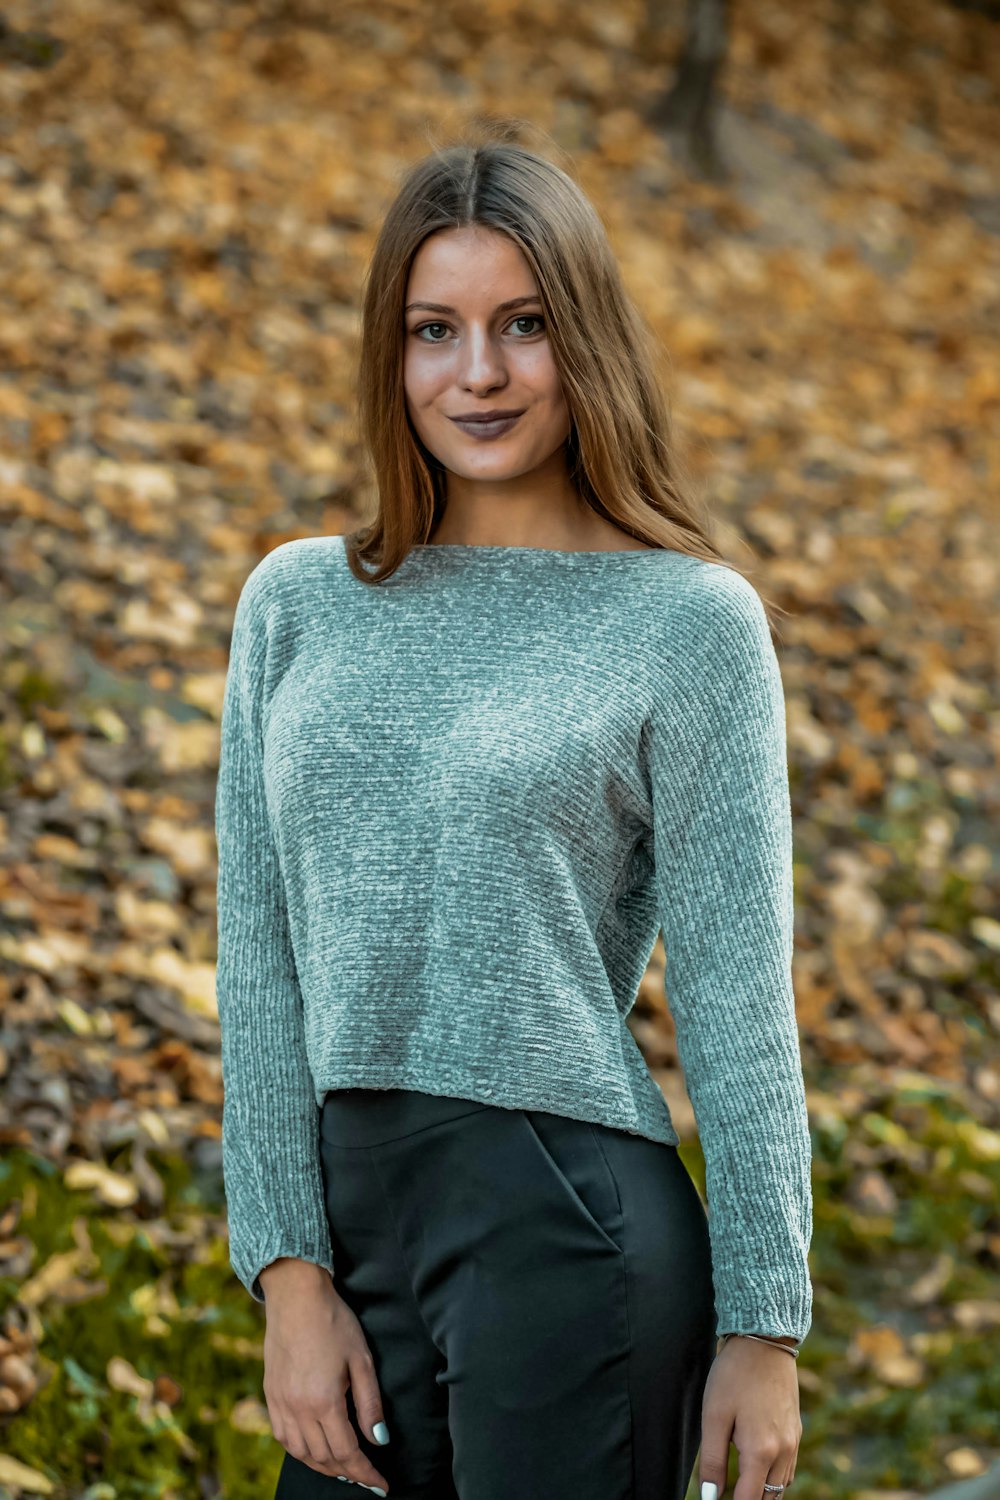 woman in gray sweater and black pants